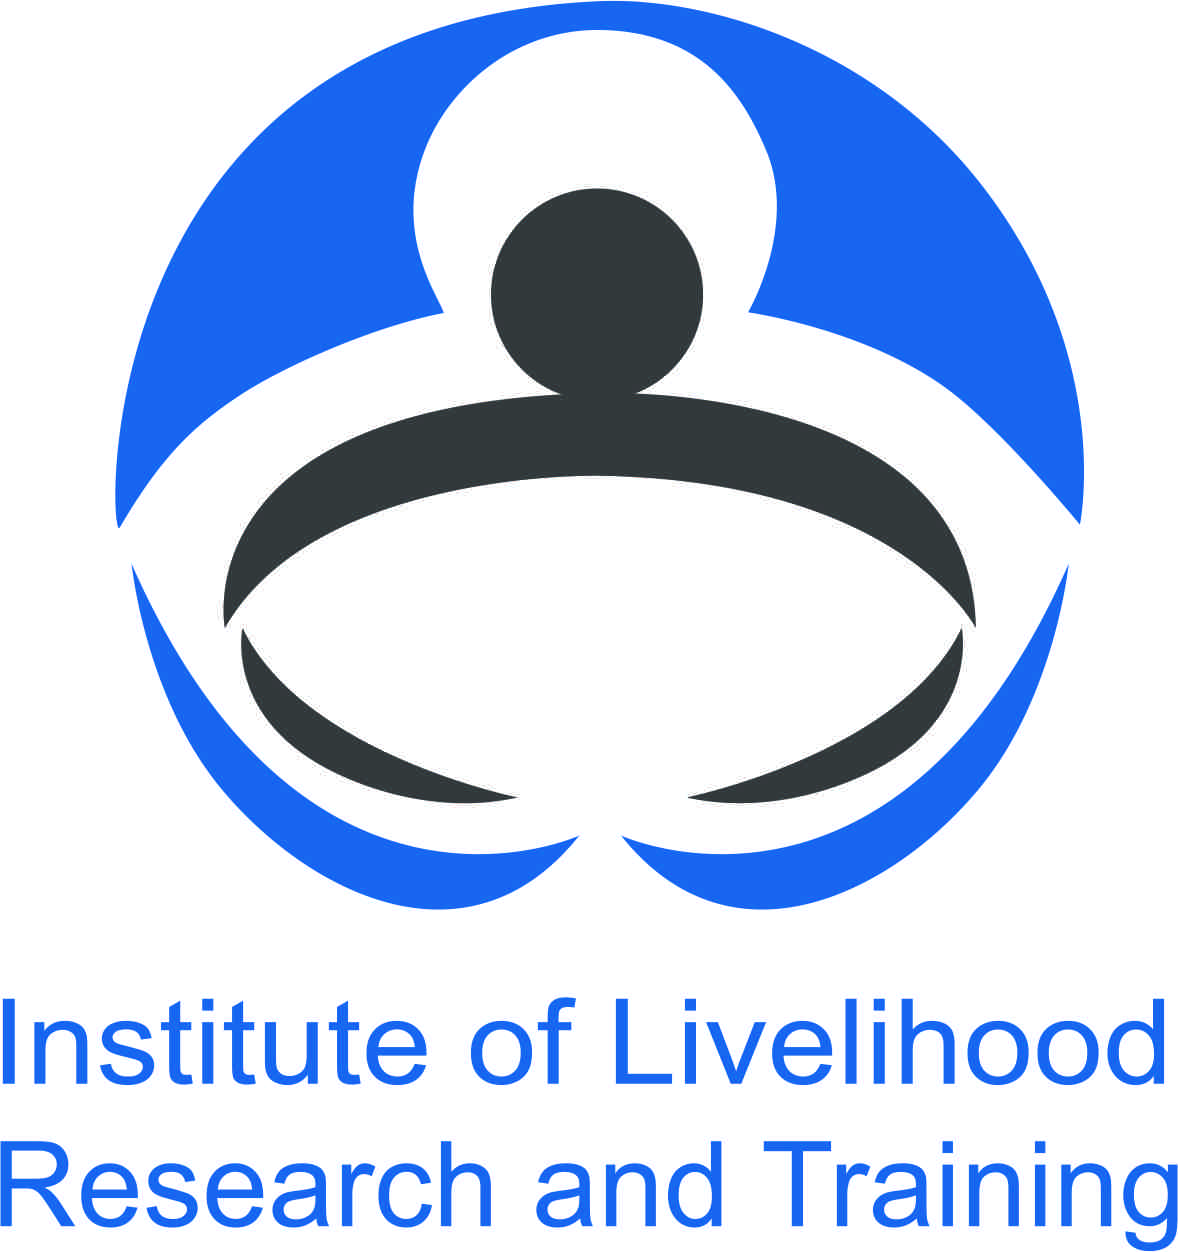 Institute of Livelihood Research and Training